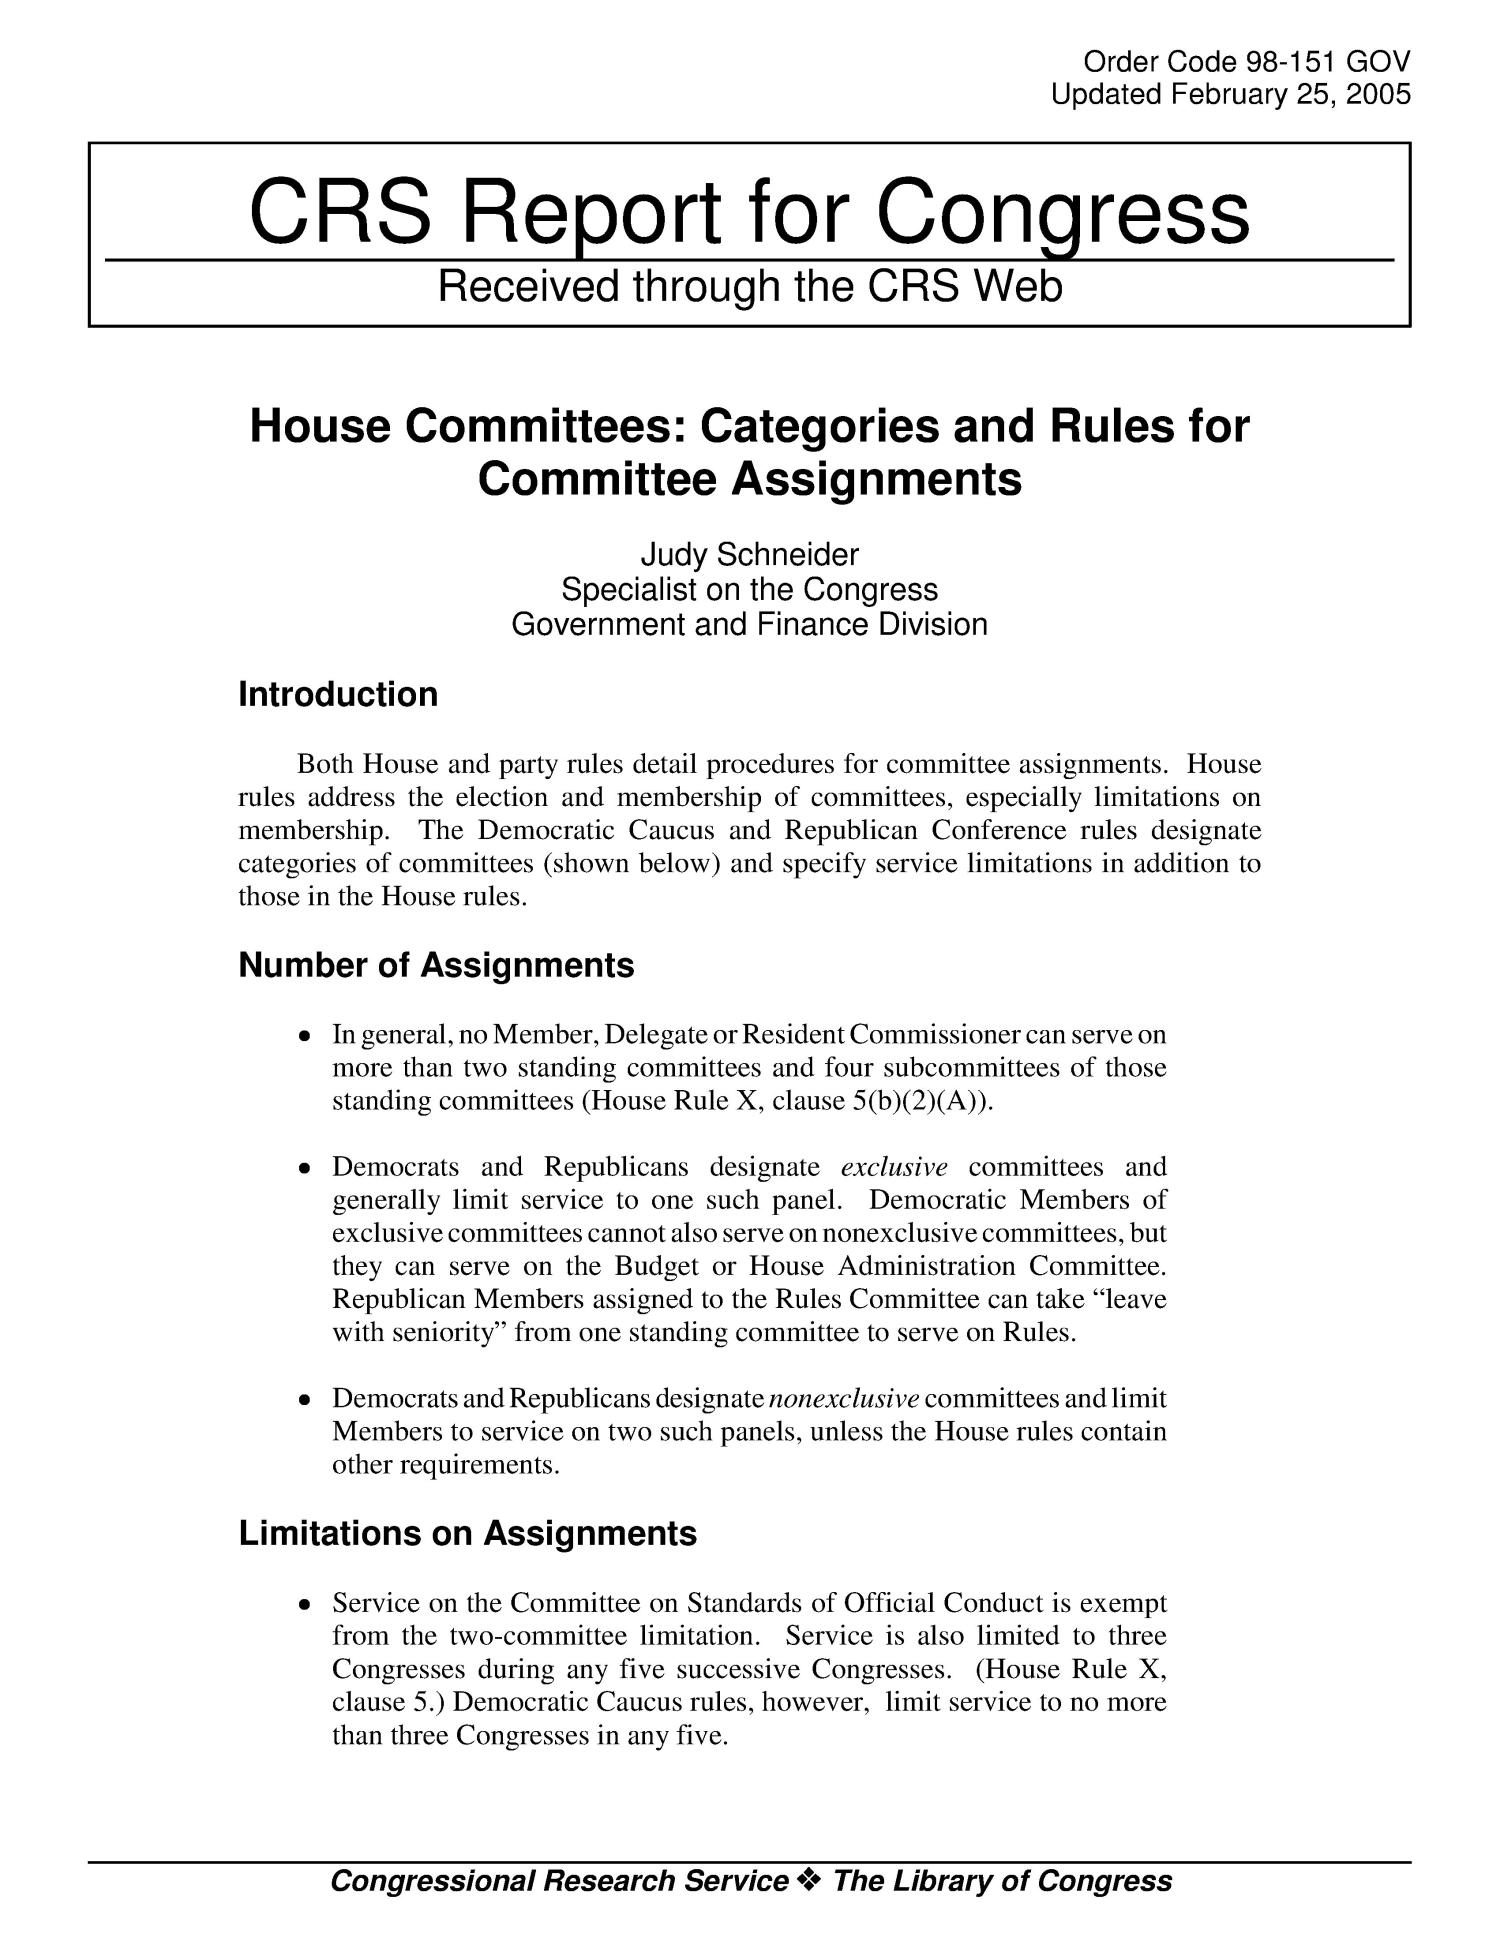 who decides house committee assignments